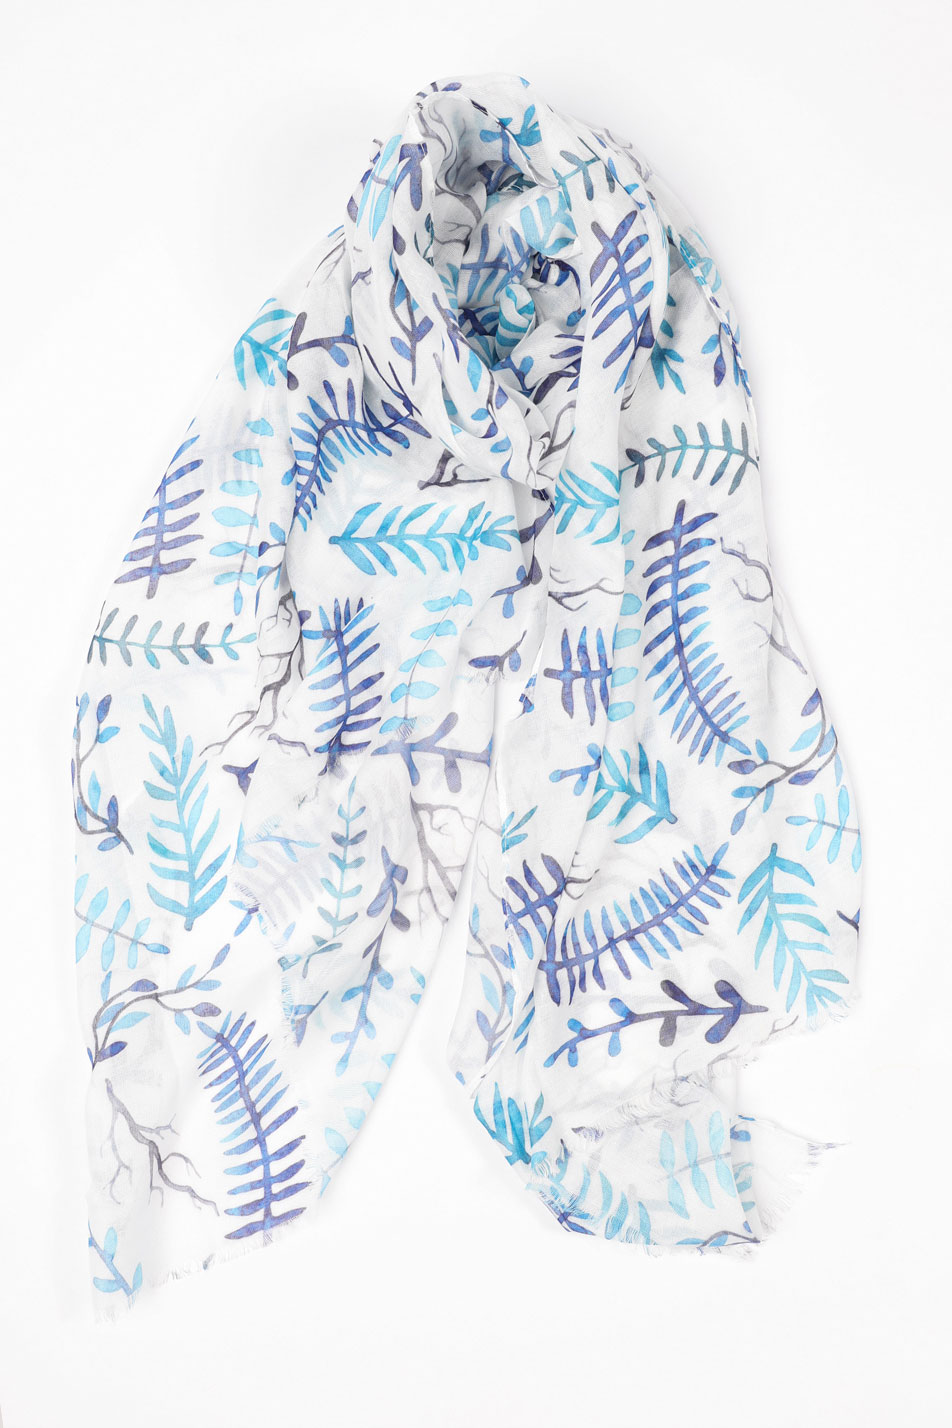 White and blue leaf scarf